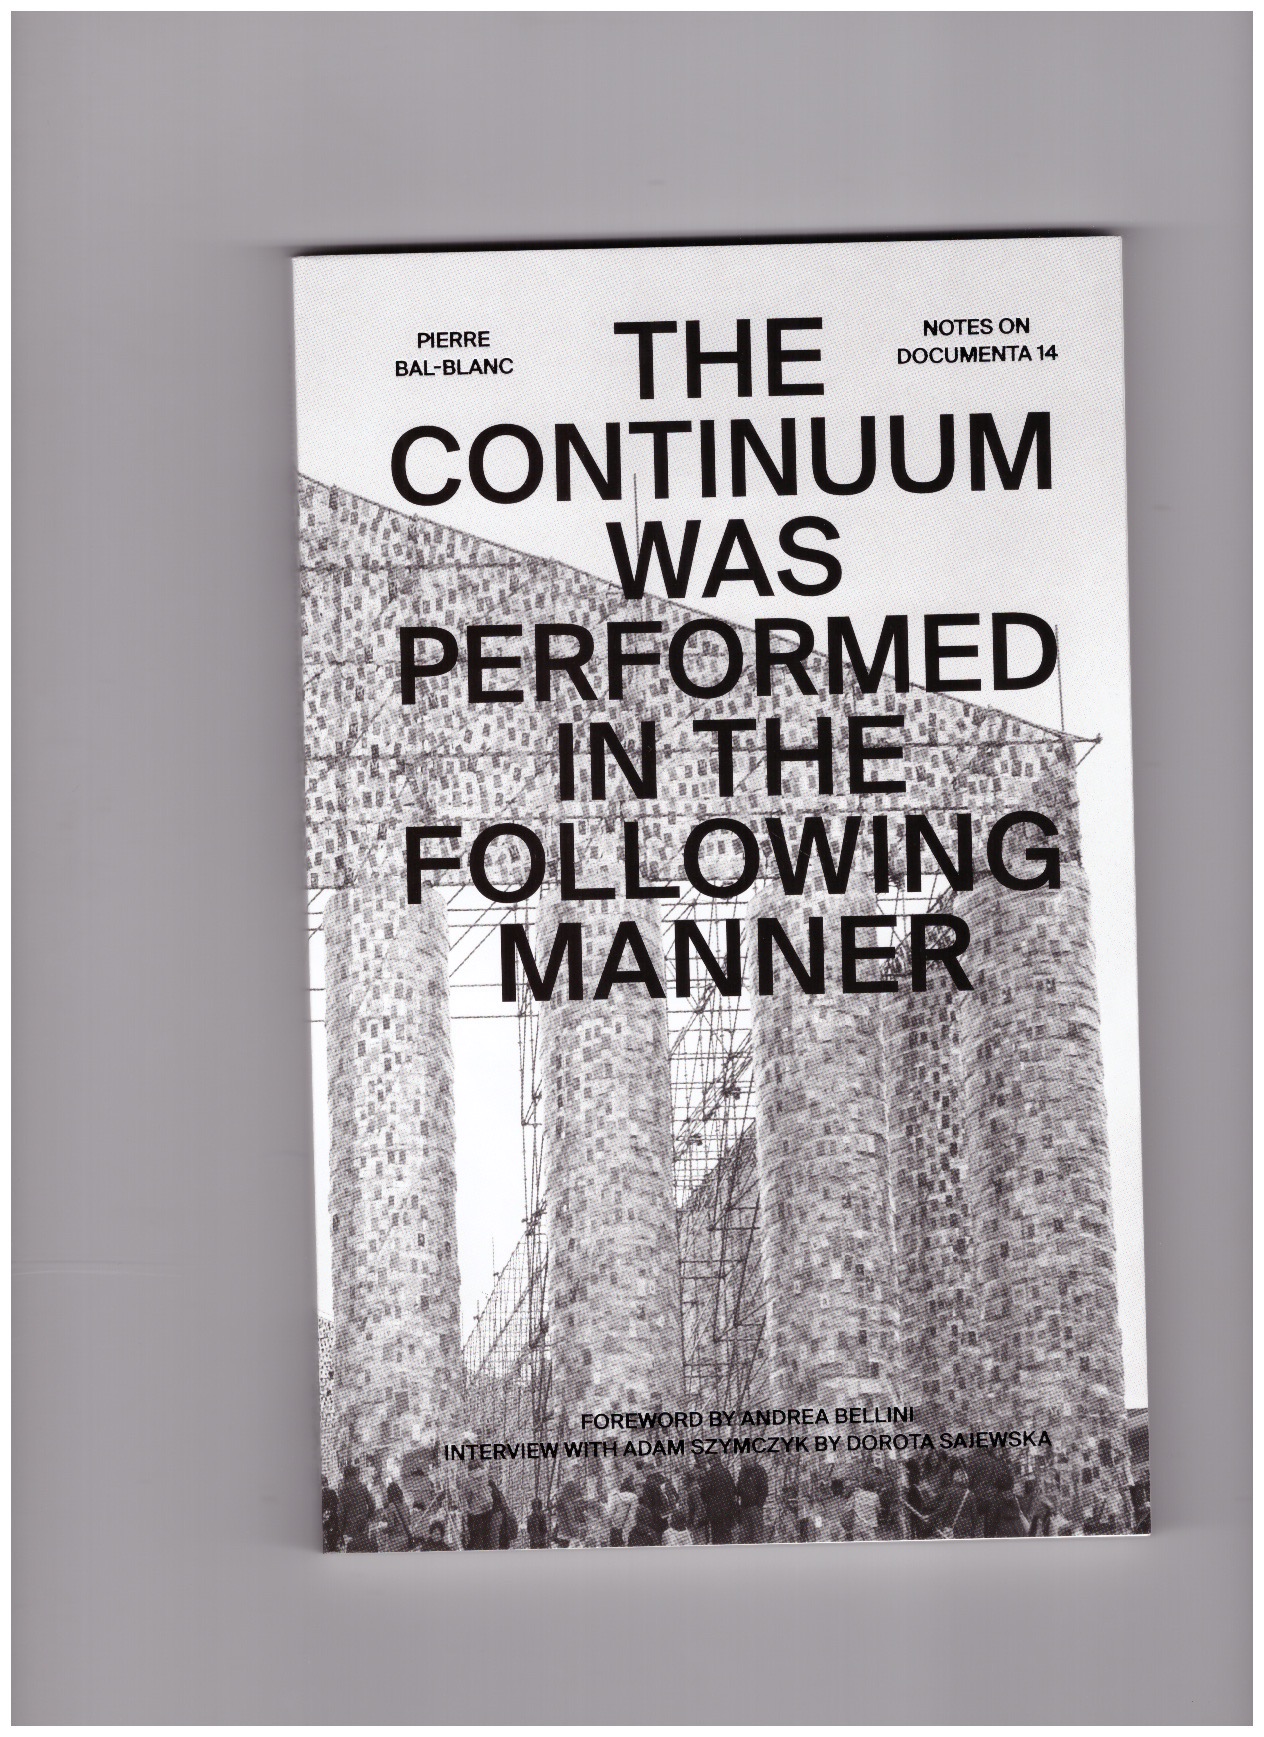 BAL BLANC, Pierre - The Continuum Was Performed in the Following Manner – Notes on documenta 14